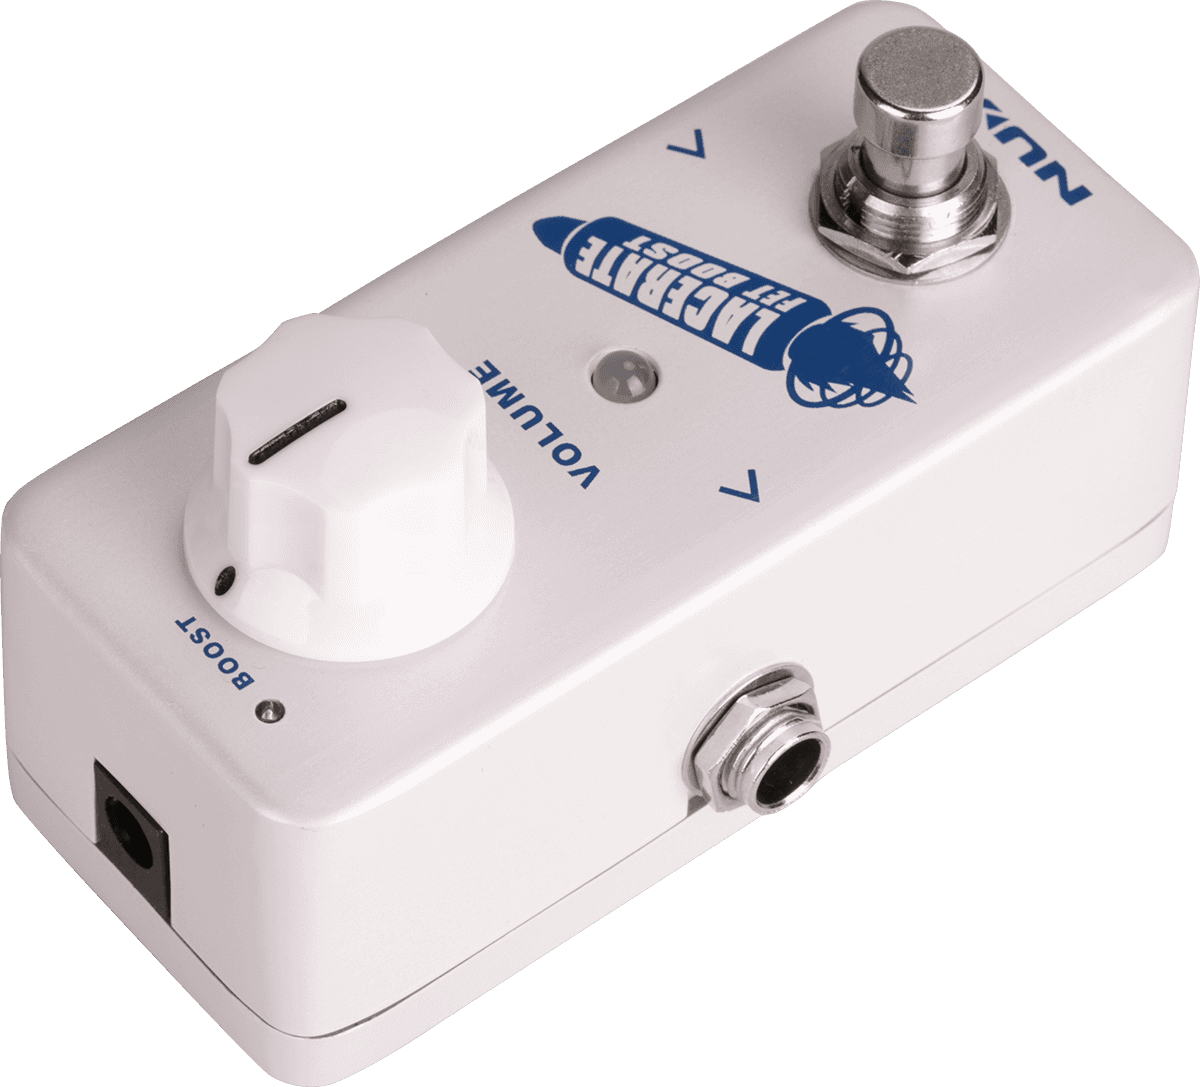 Nux Lacerate Boost Fet - Volume, boost & expression effect pedal - Variation 2